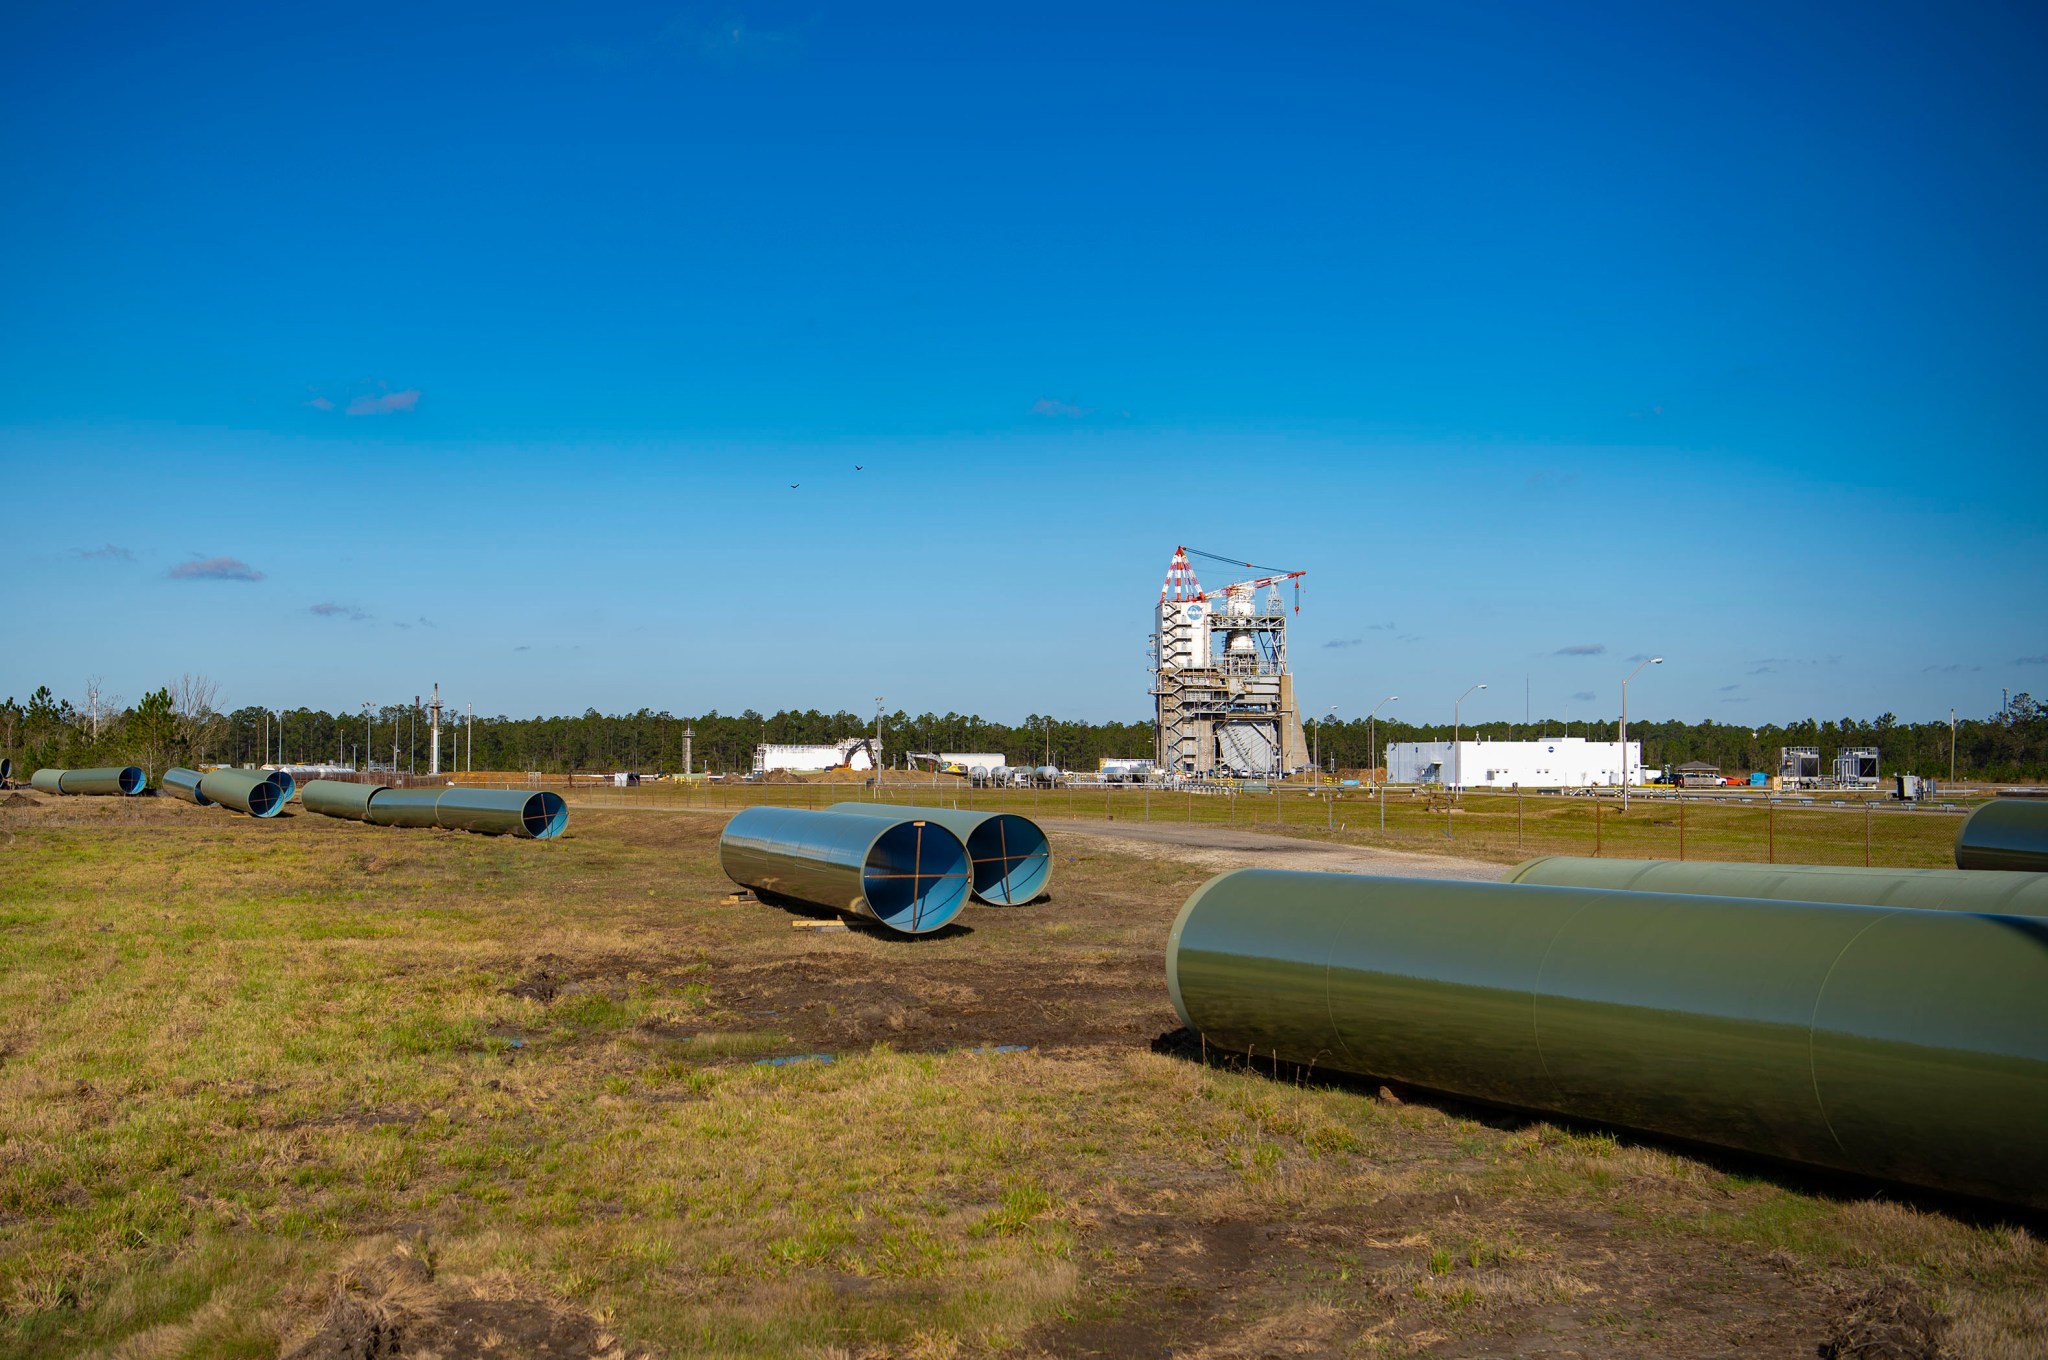 Sections of new 75-inch pipe await installation between Stennis Space Center’s High Pressure Industrial Water Facility and the valve vault pit serving the Fred Haise Test Stand